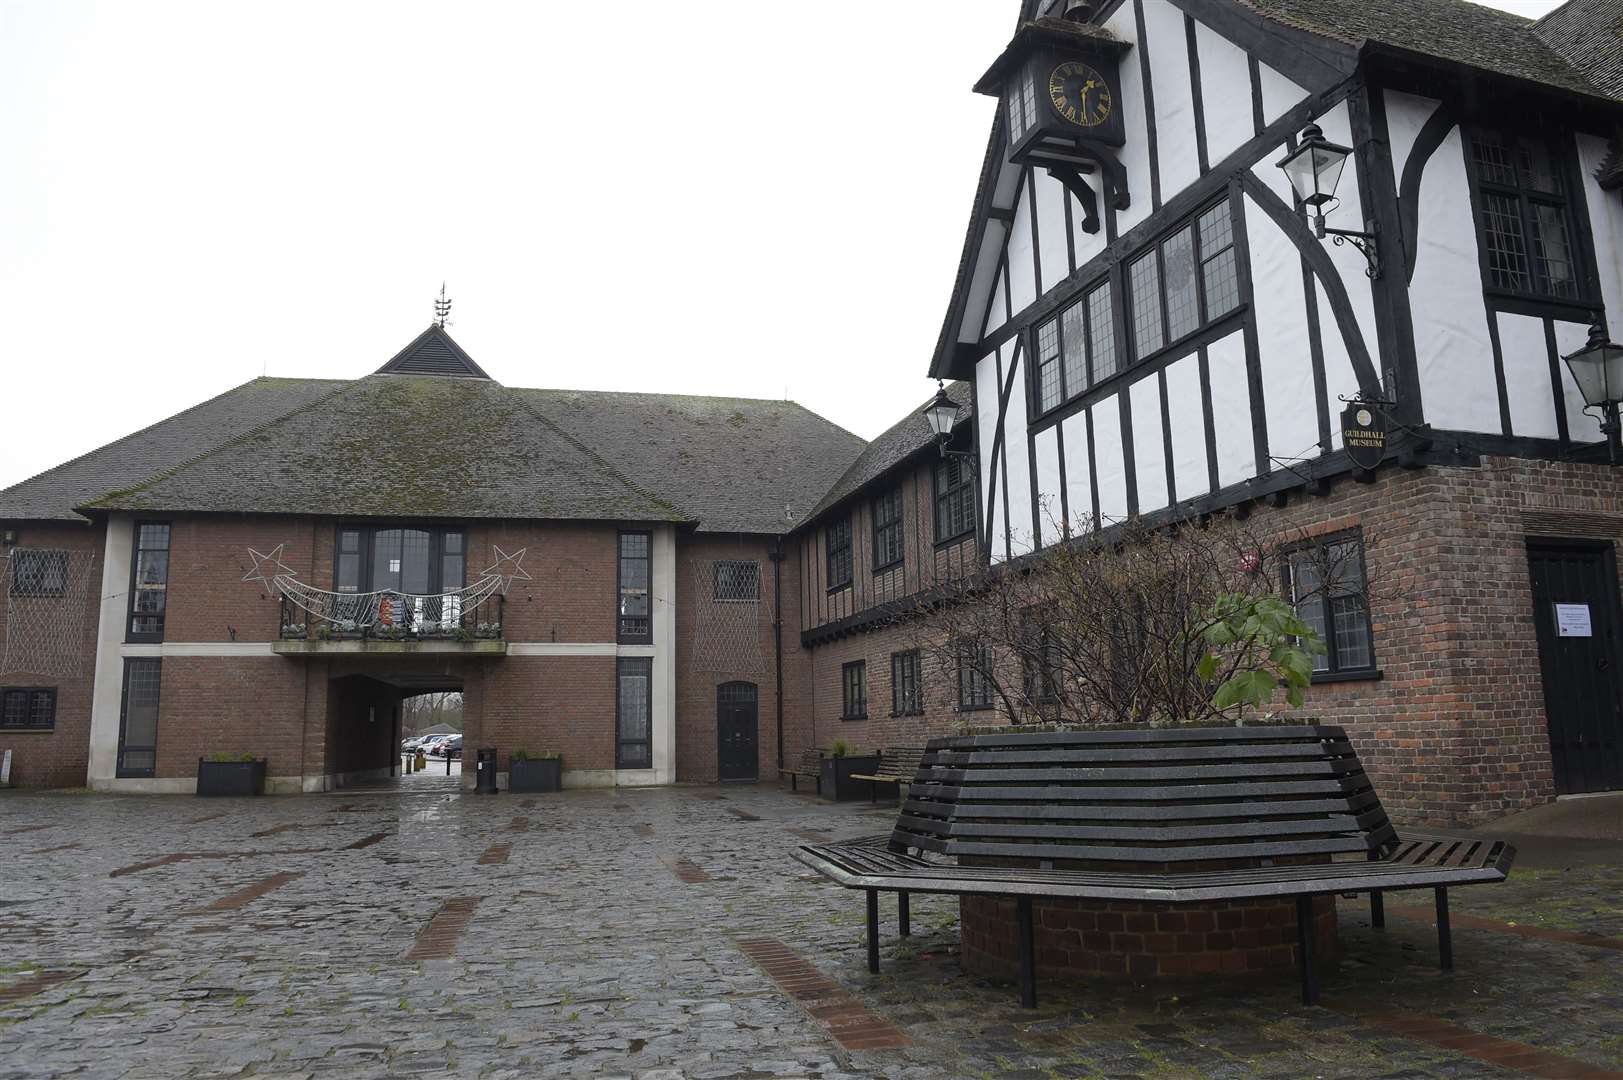 The inquest is taking place at The Guildhall in Sandwich